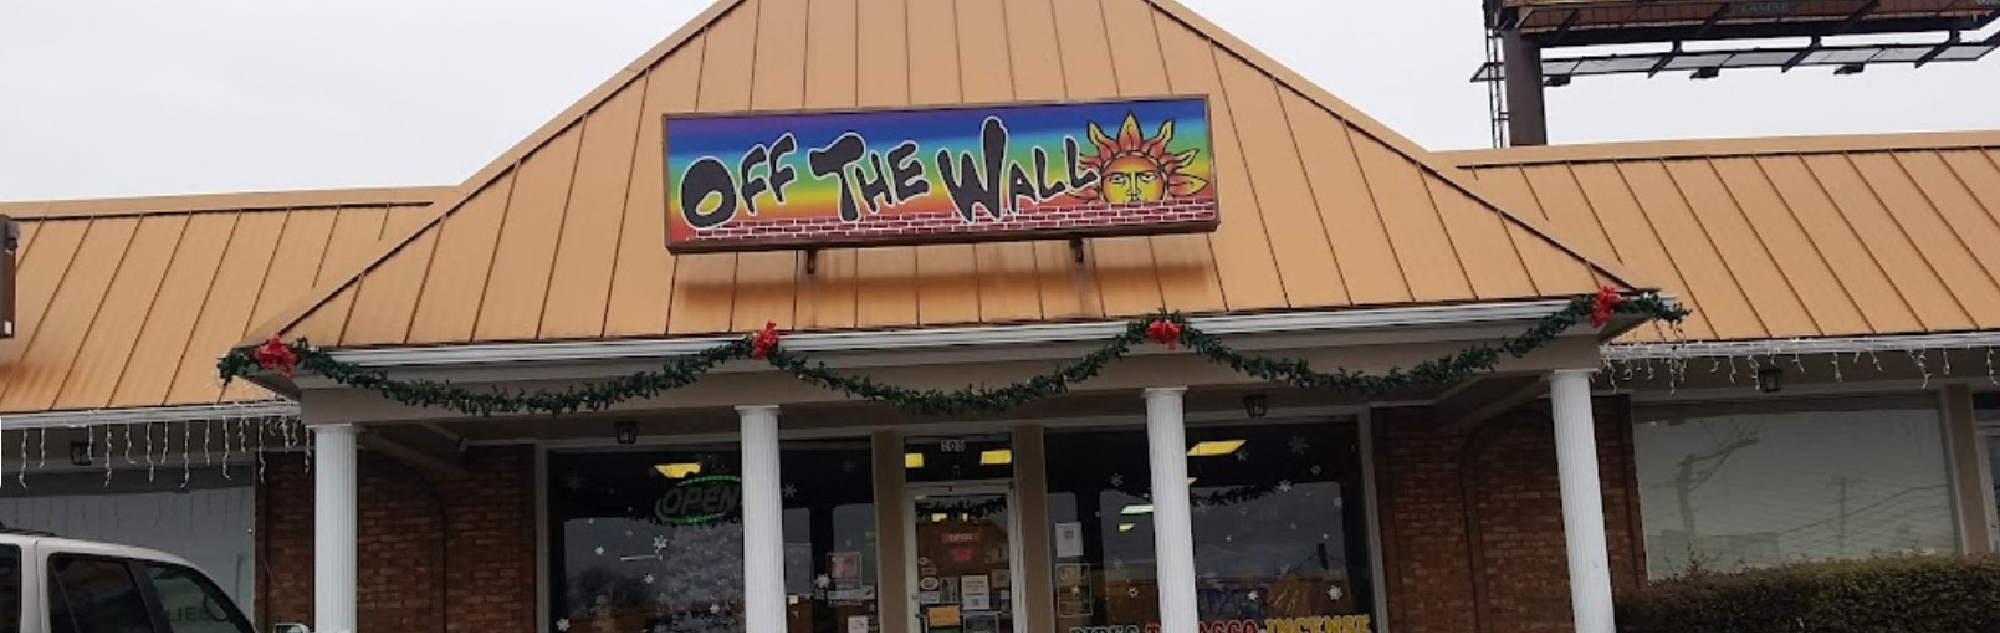 image of off the wall in knoxville tennesse